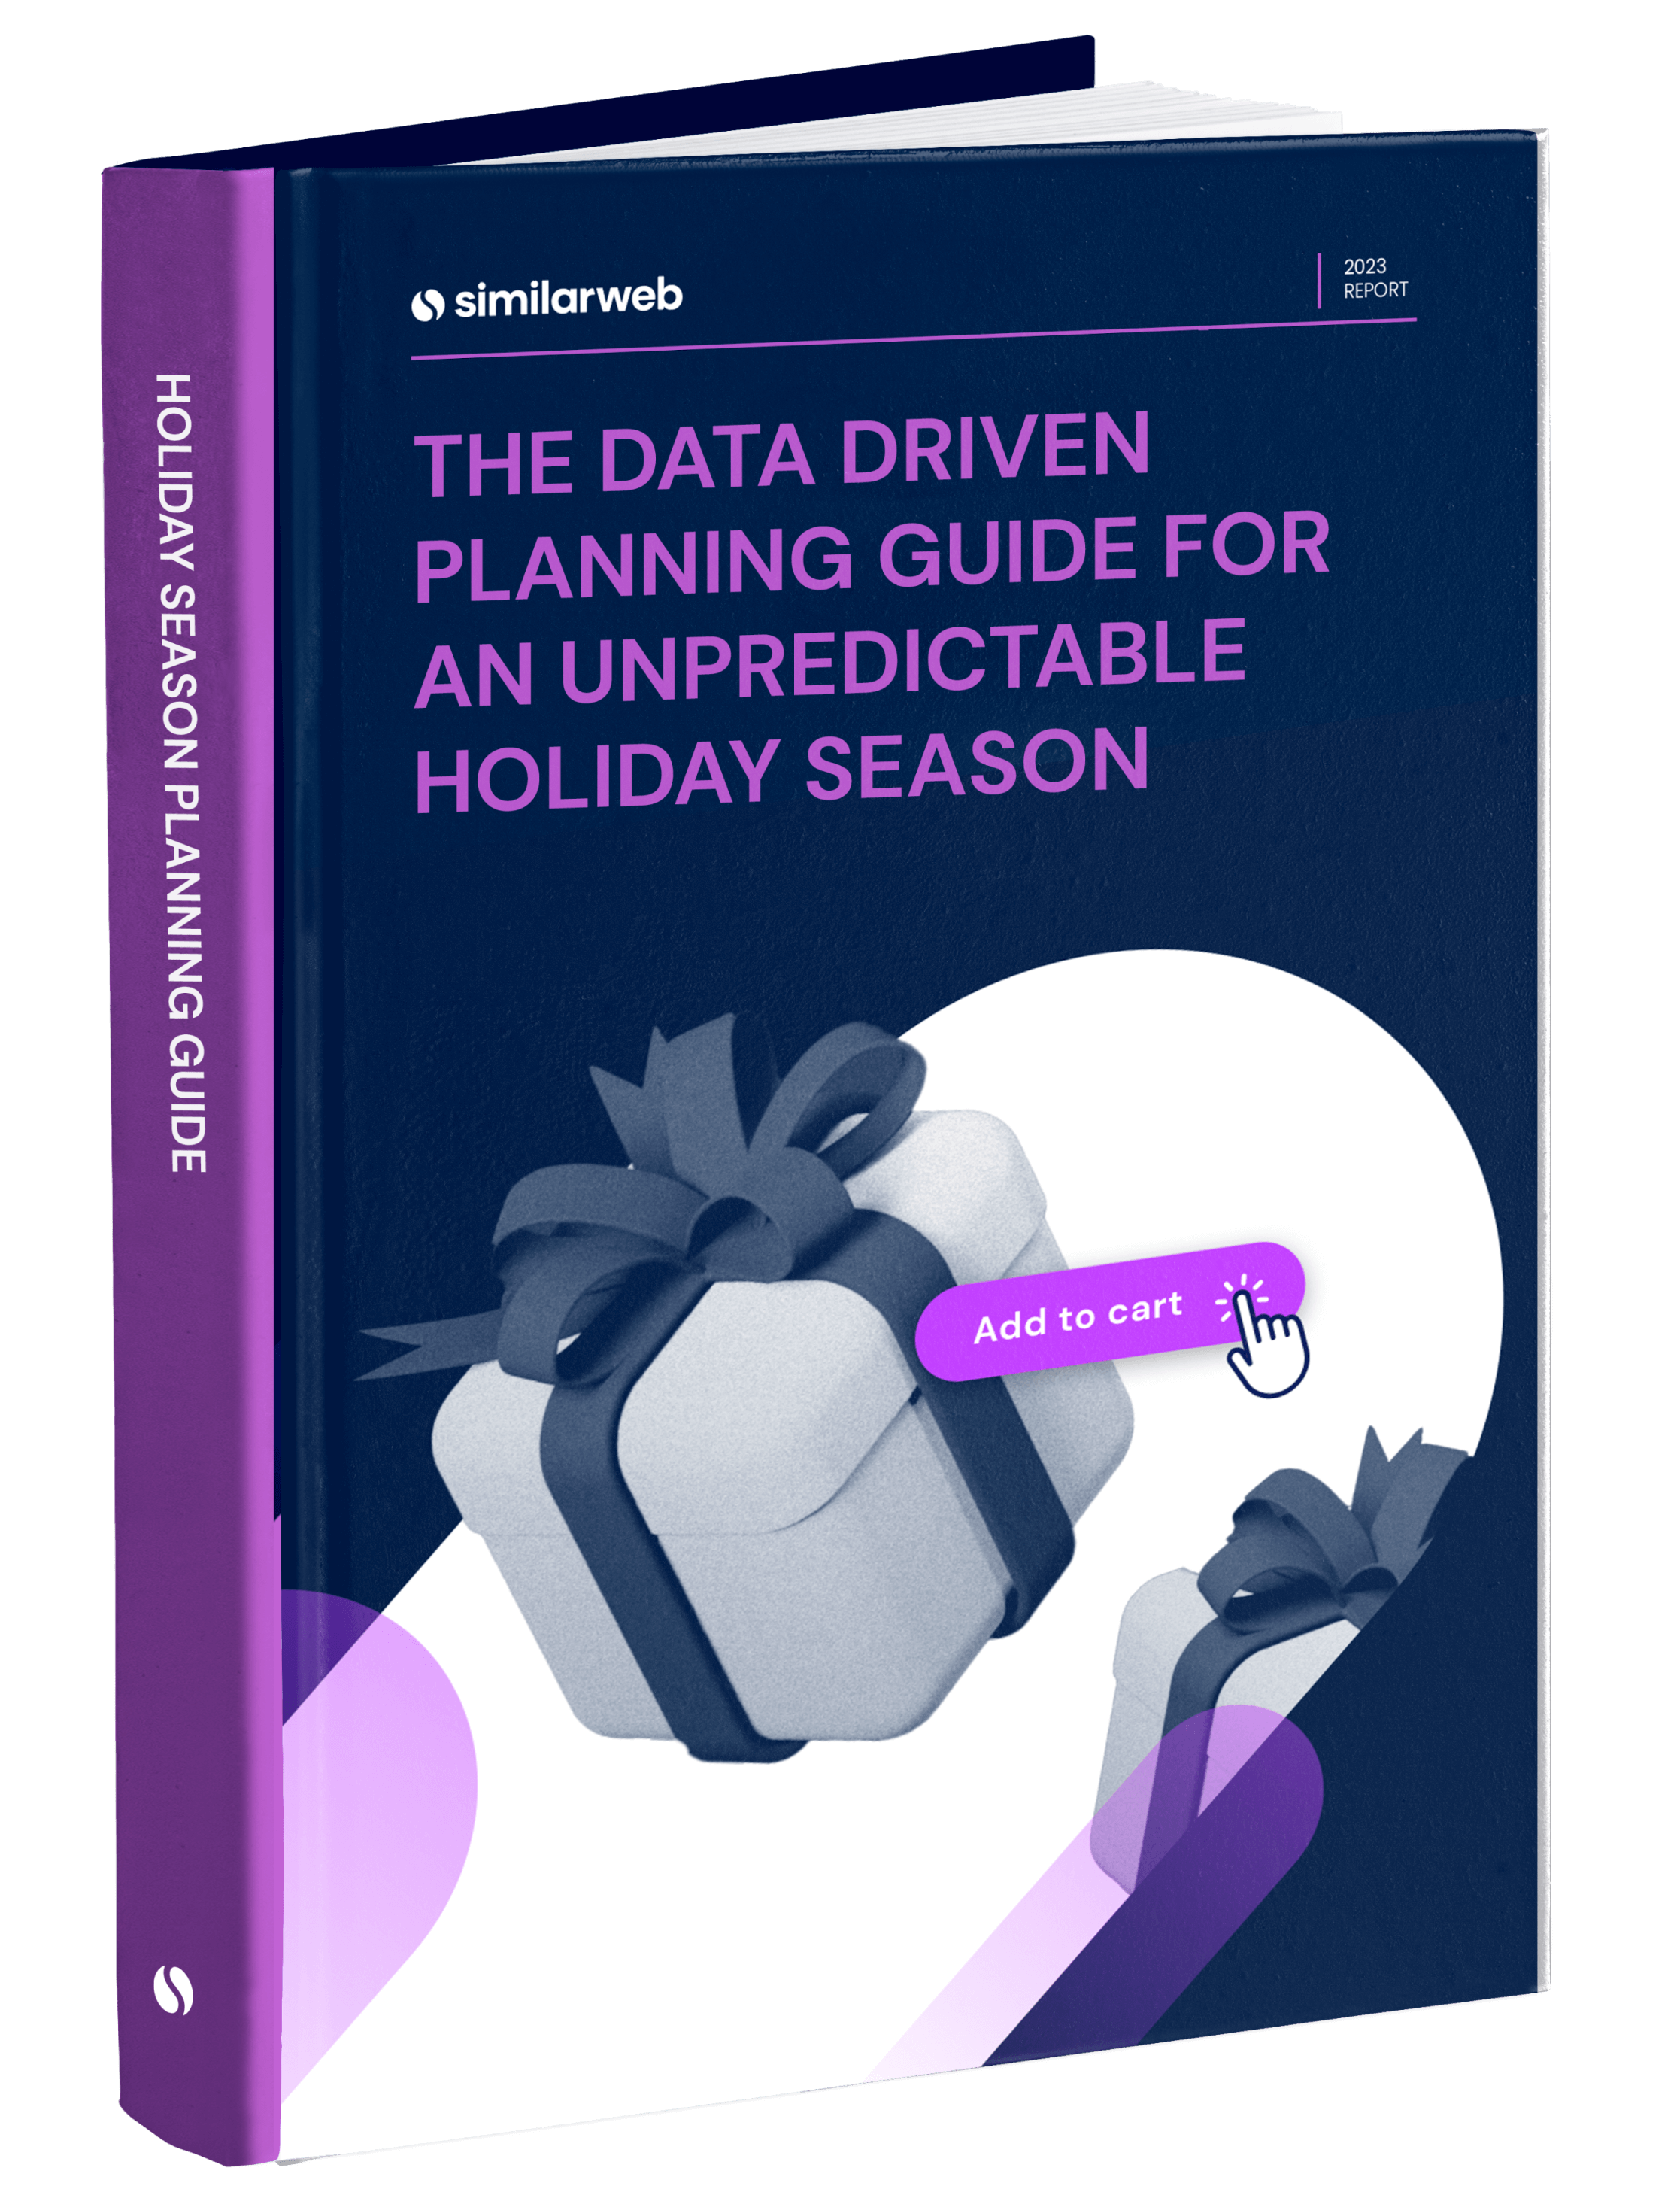 The Data-Driven Planning Guide for an Unpredictable Holiday Season